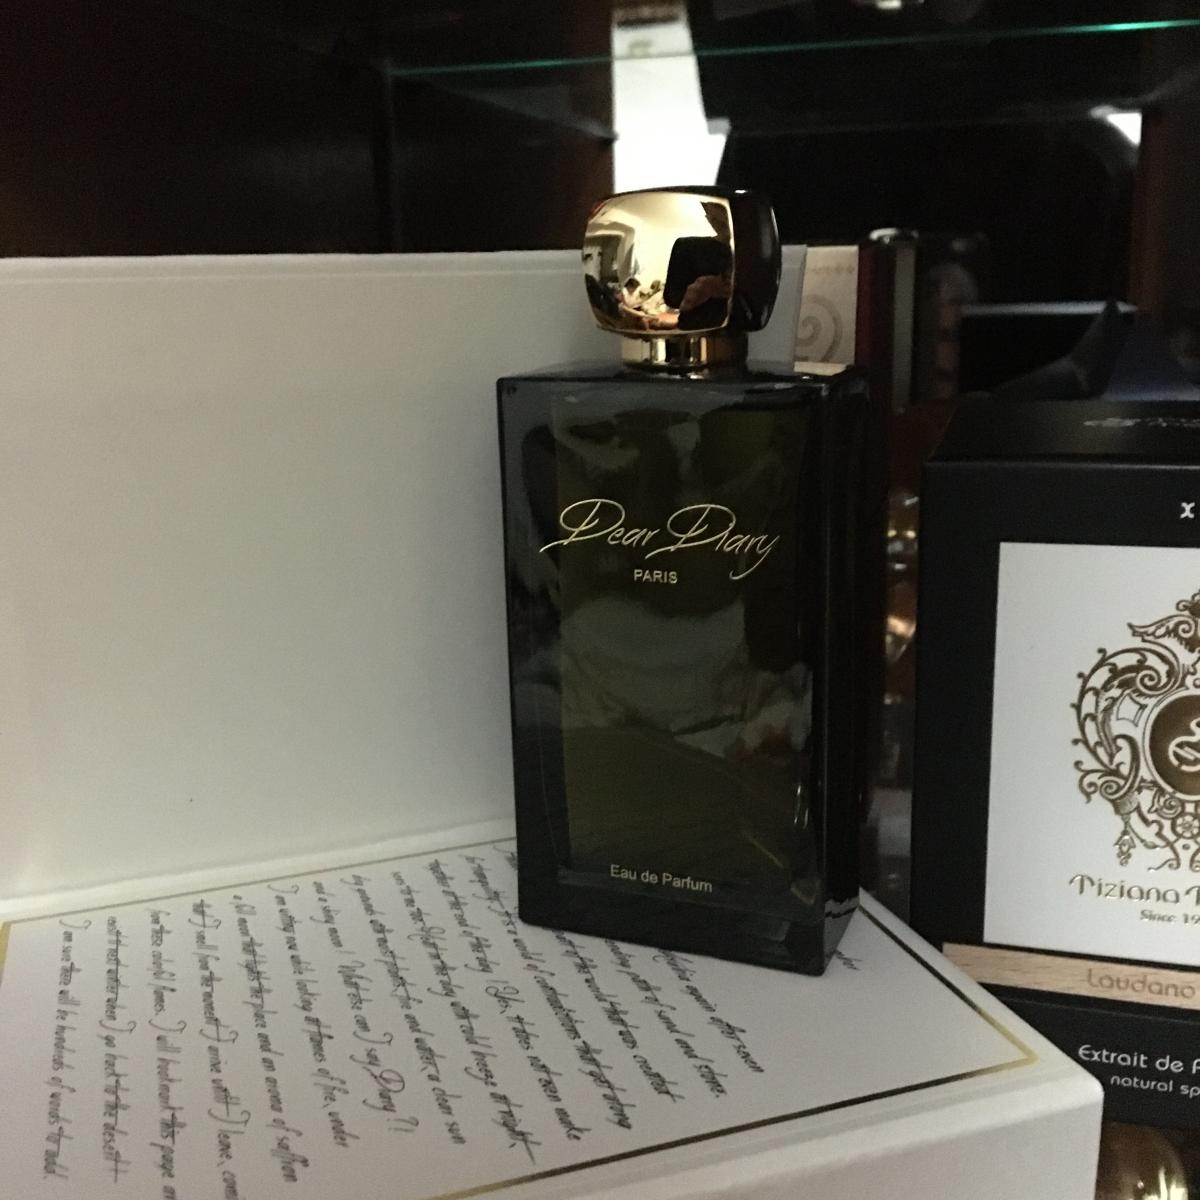 Desert Nights to Remember Dear Diary perfume - a fragrance for women ...